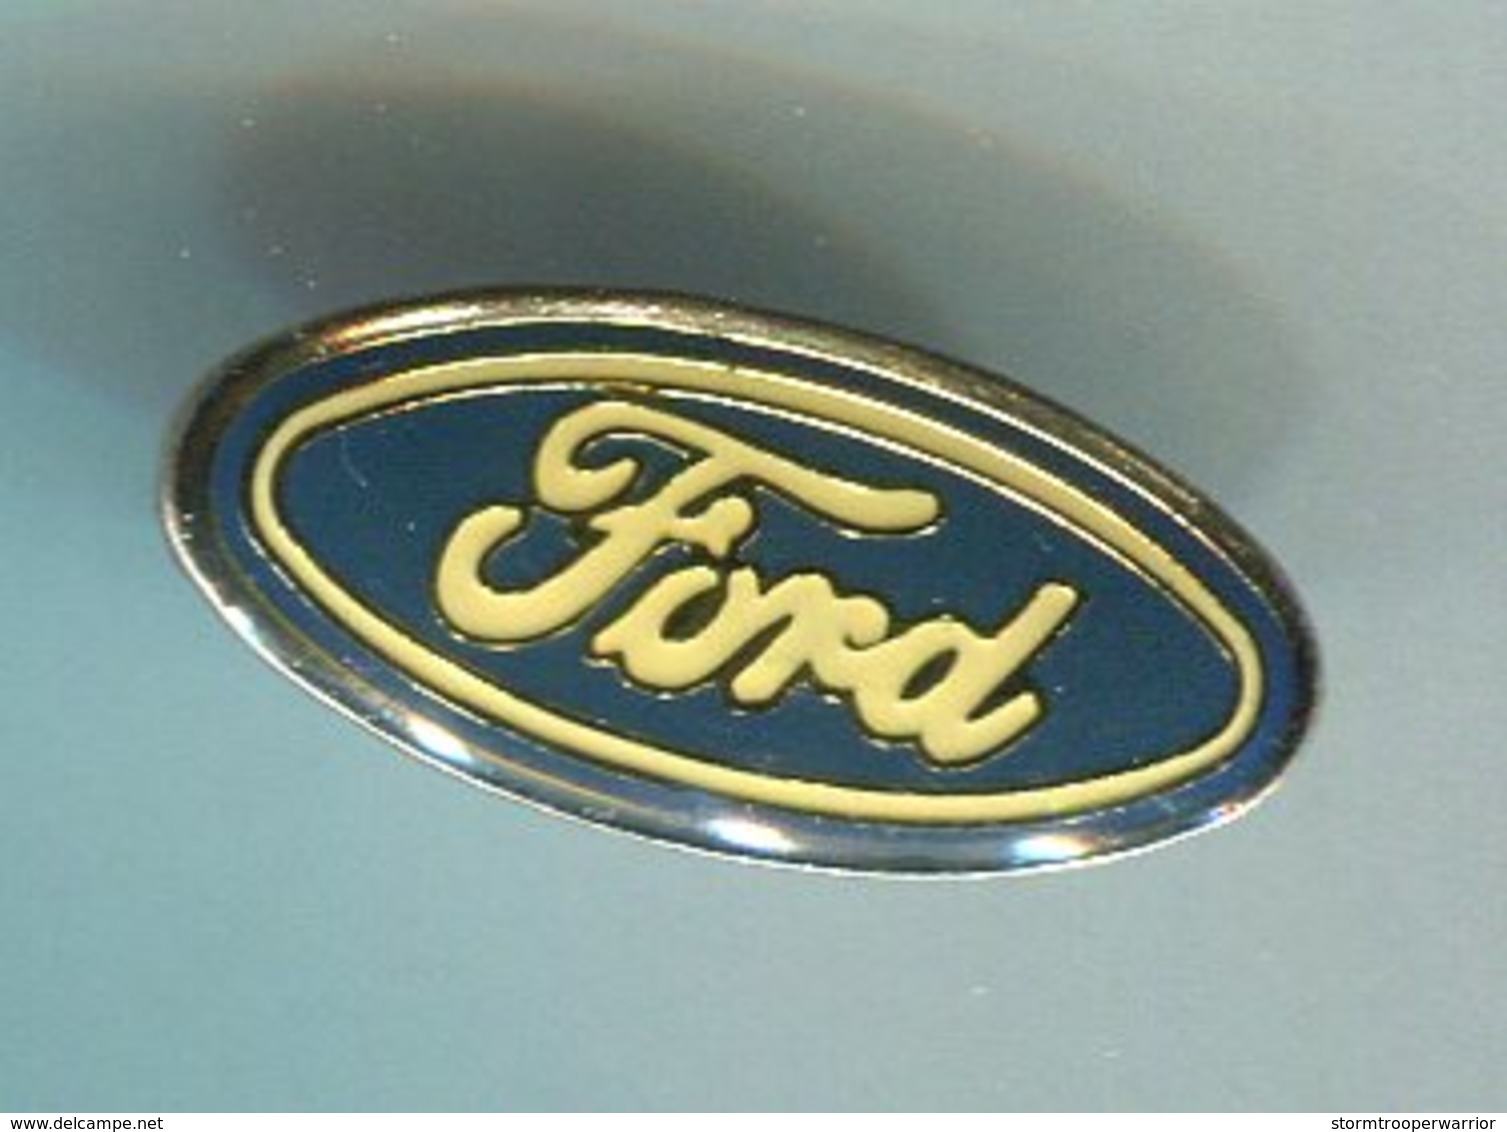 Pin's - FORD Logo - Ford